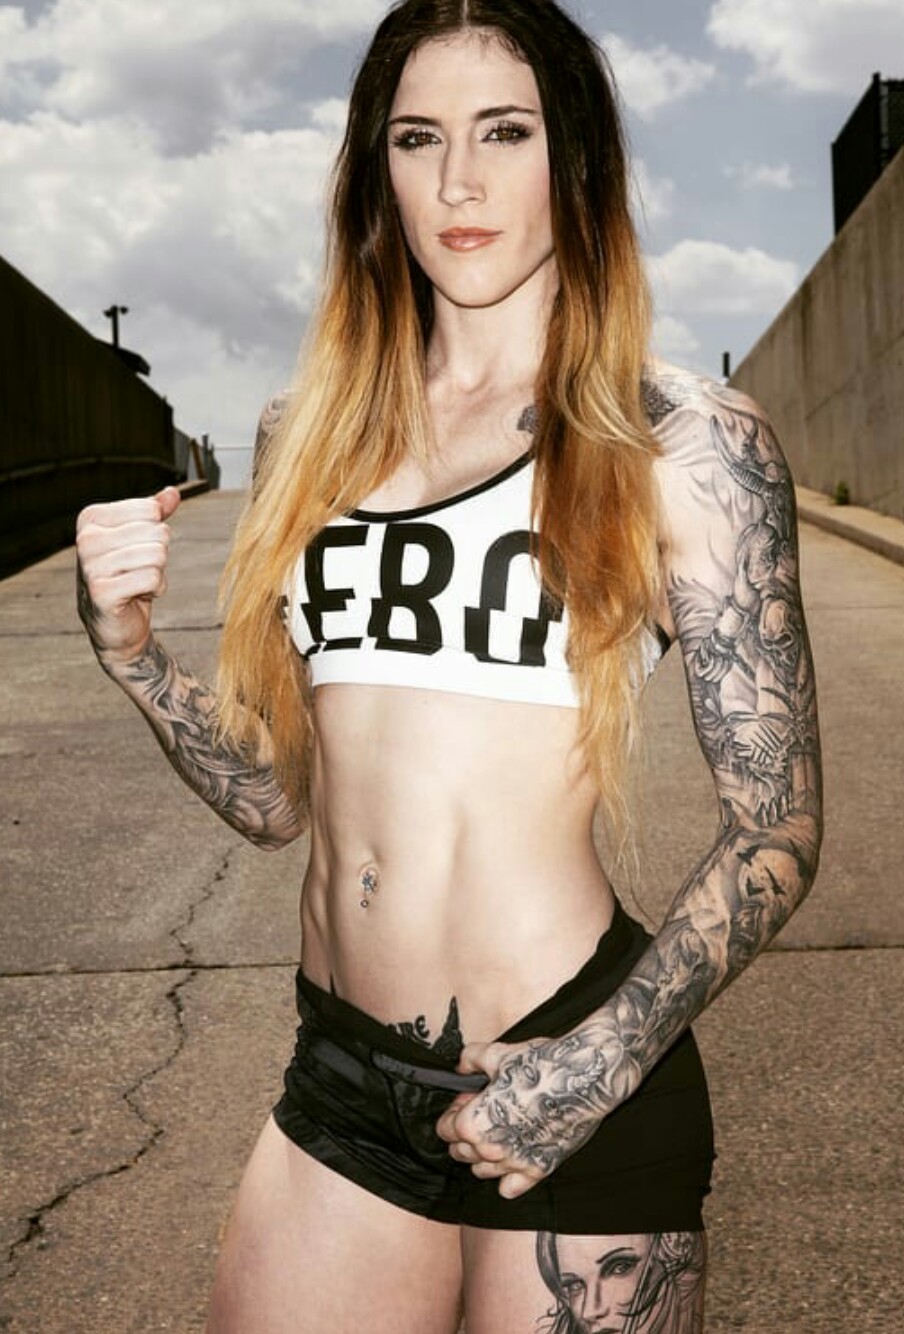 Megan Anderson is the hottest fighter. 